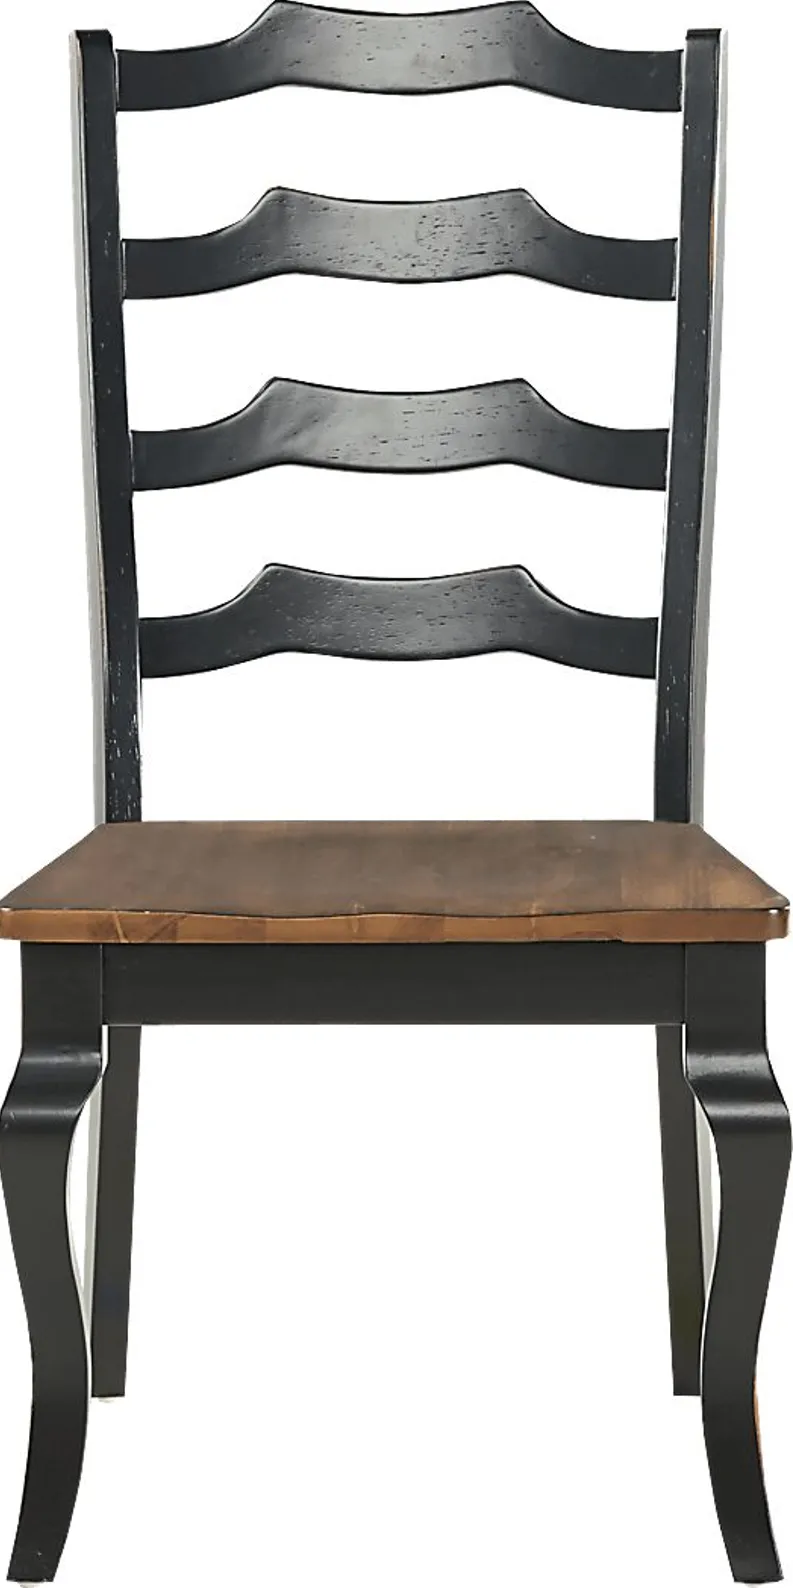 Twin Lakes Black Ladder Back Side Chair